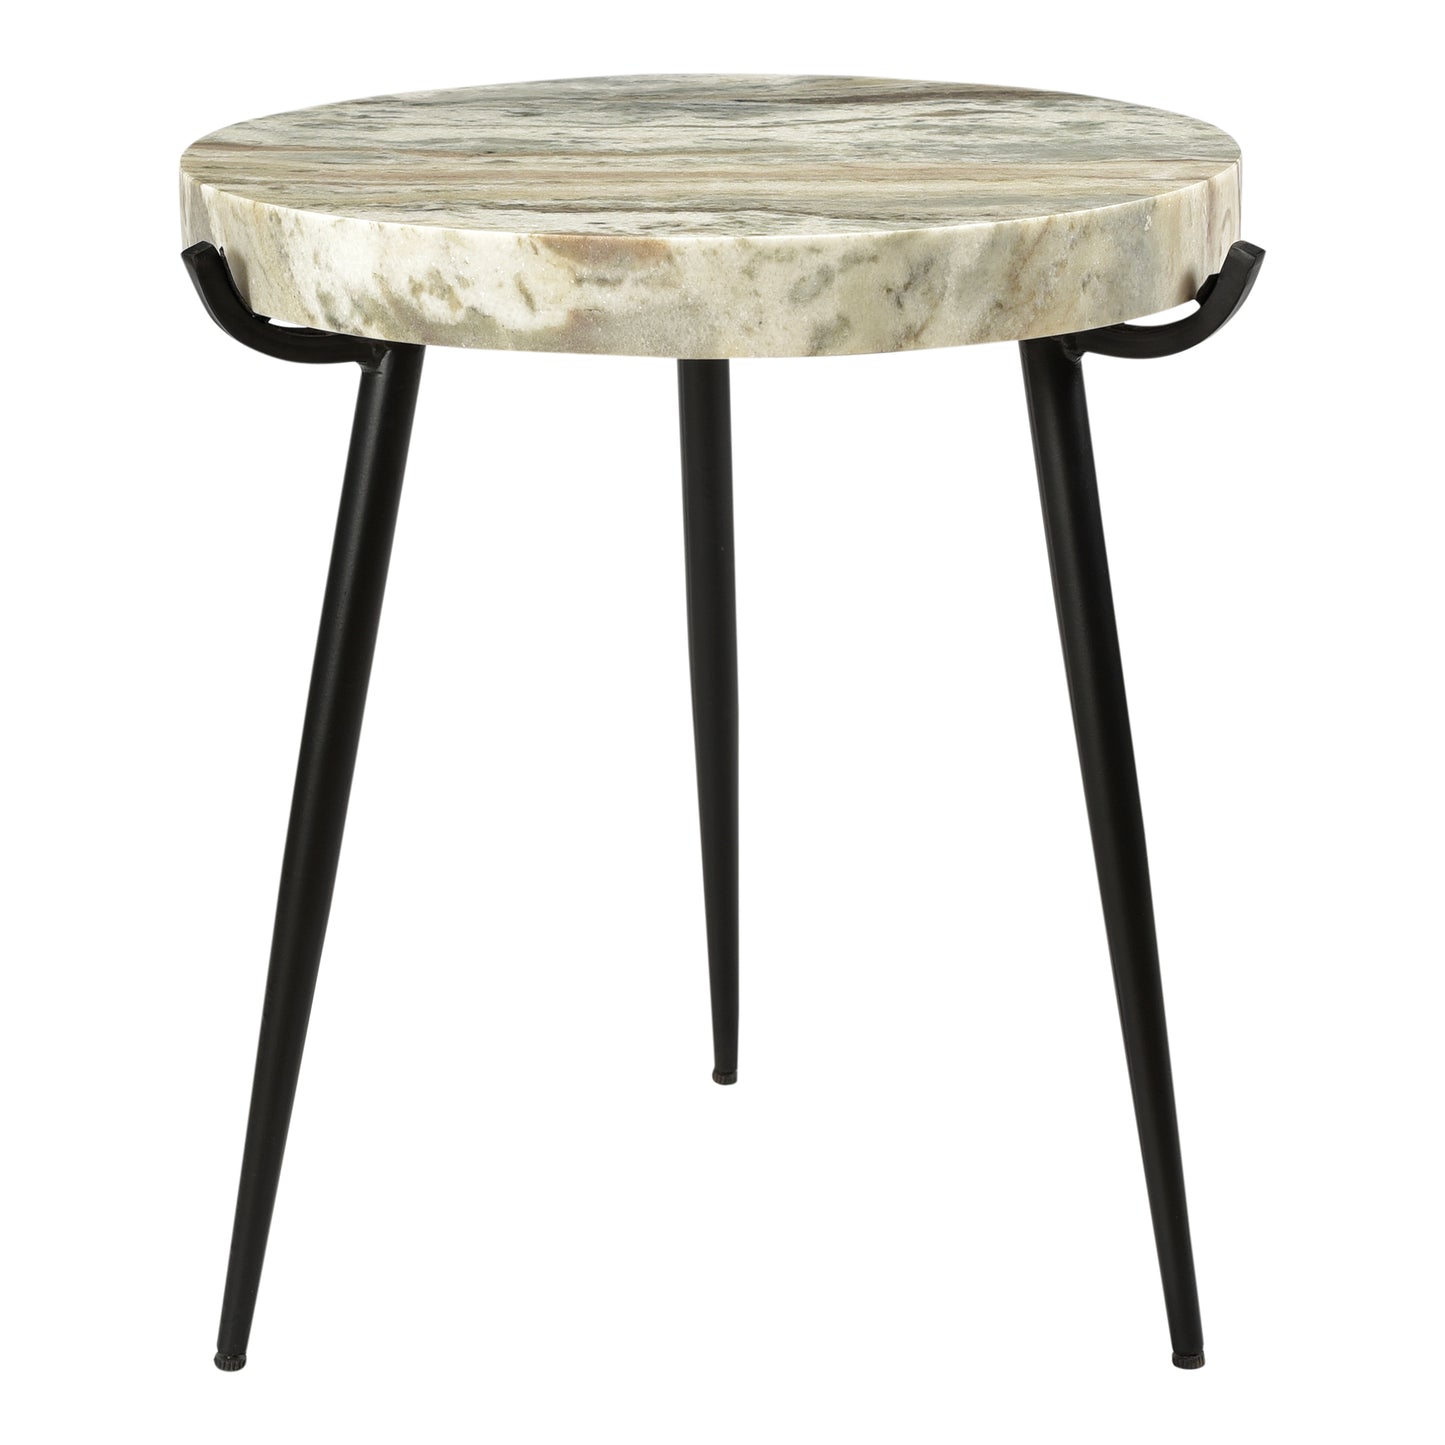 Brinley Marble Accent Table